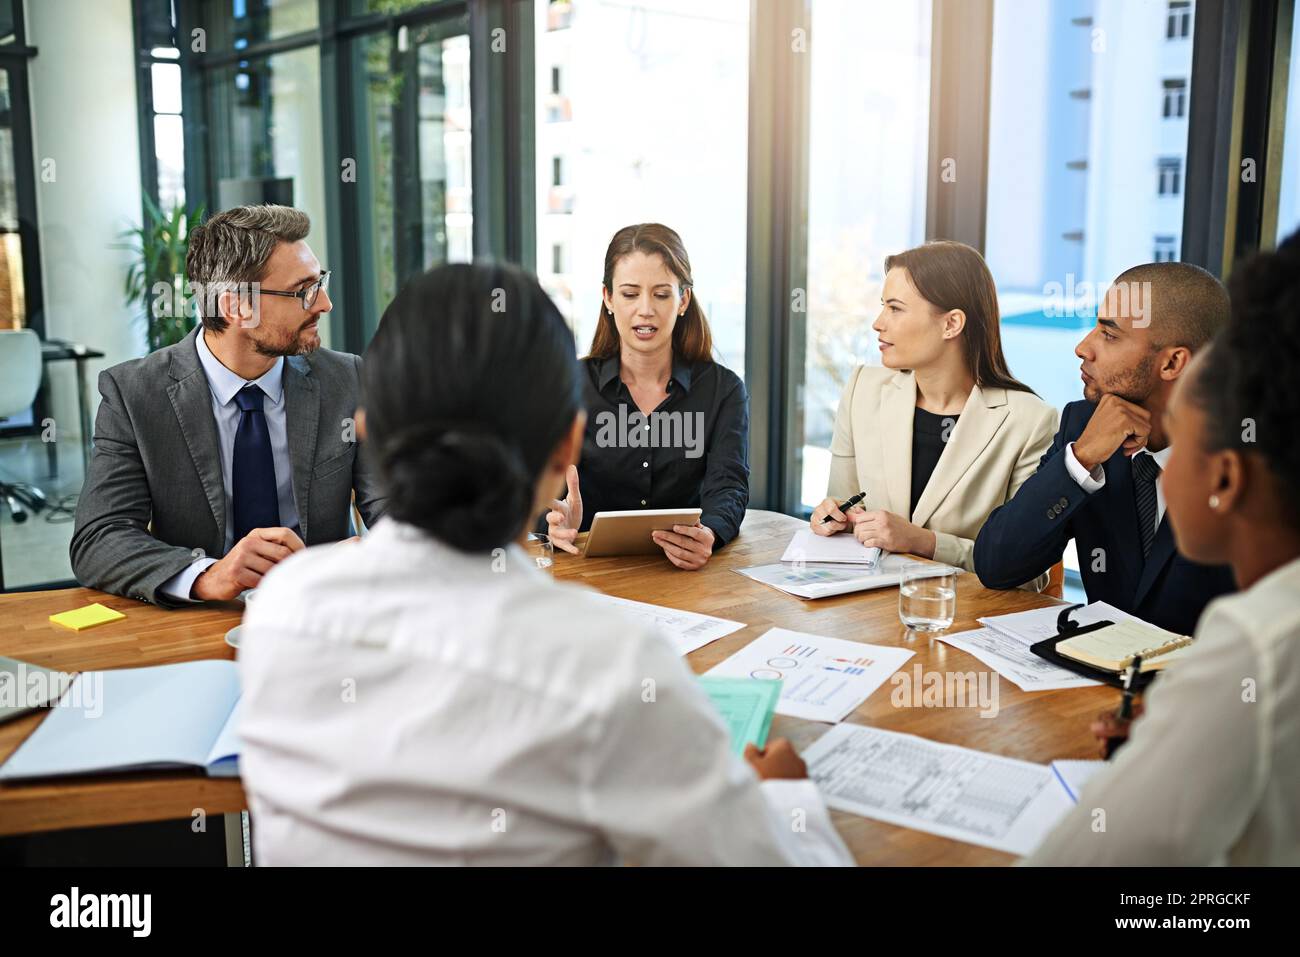 Achieving success together. a group of businesspeople meeting in the boardroom. Stock Photo